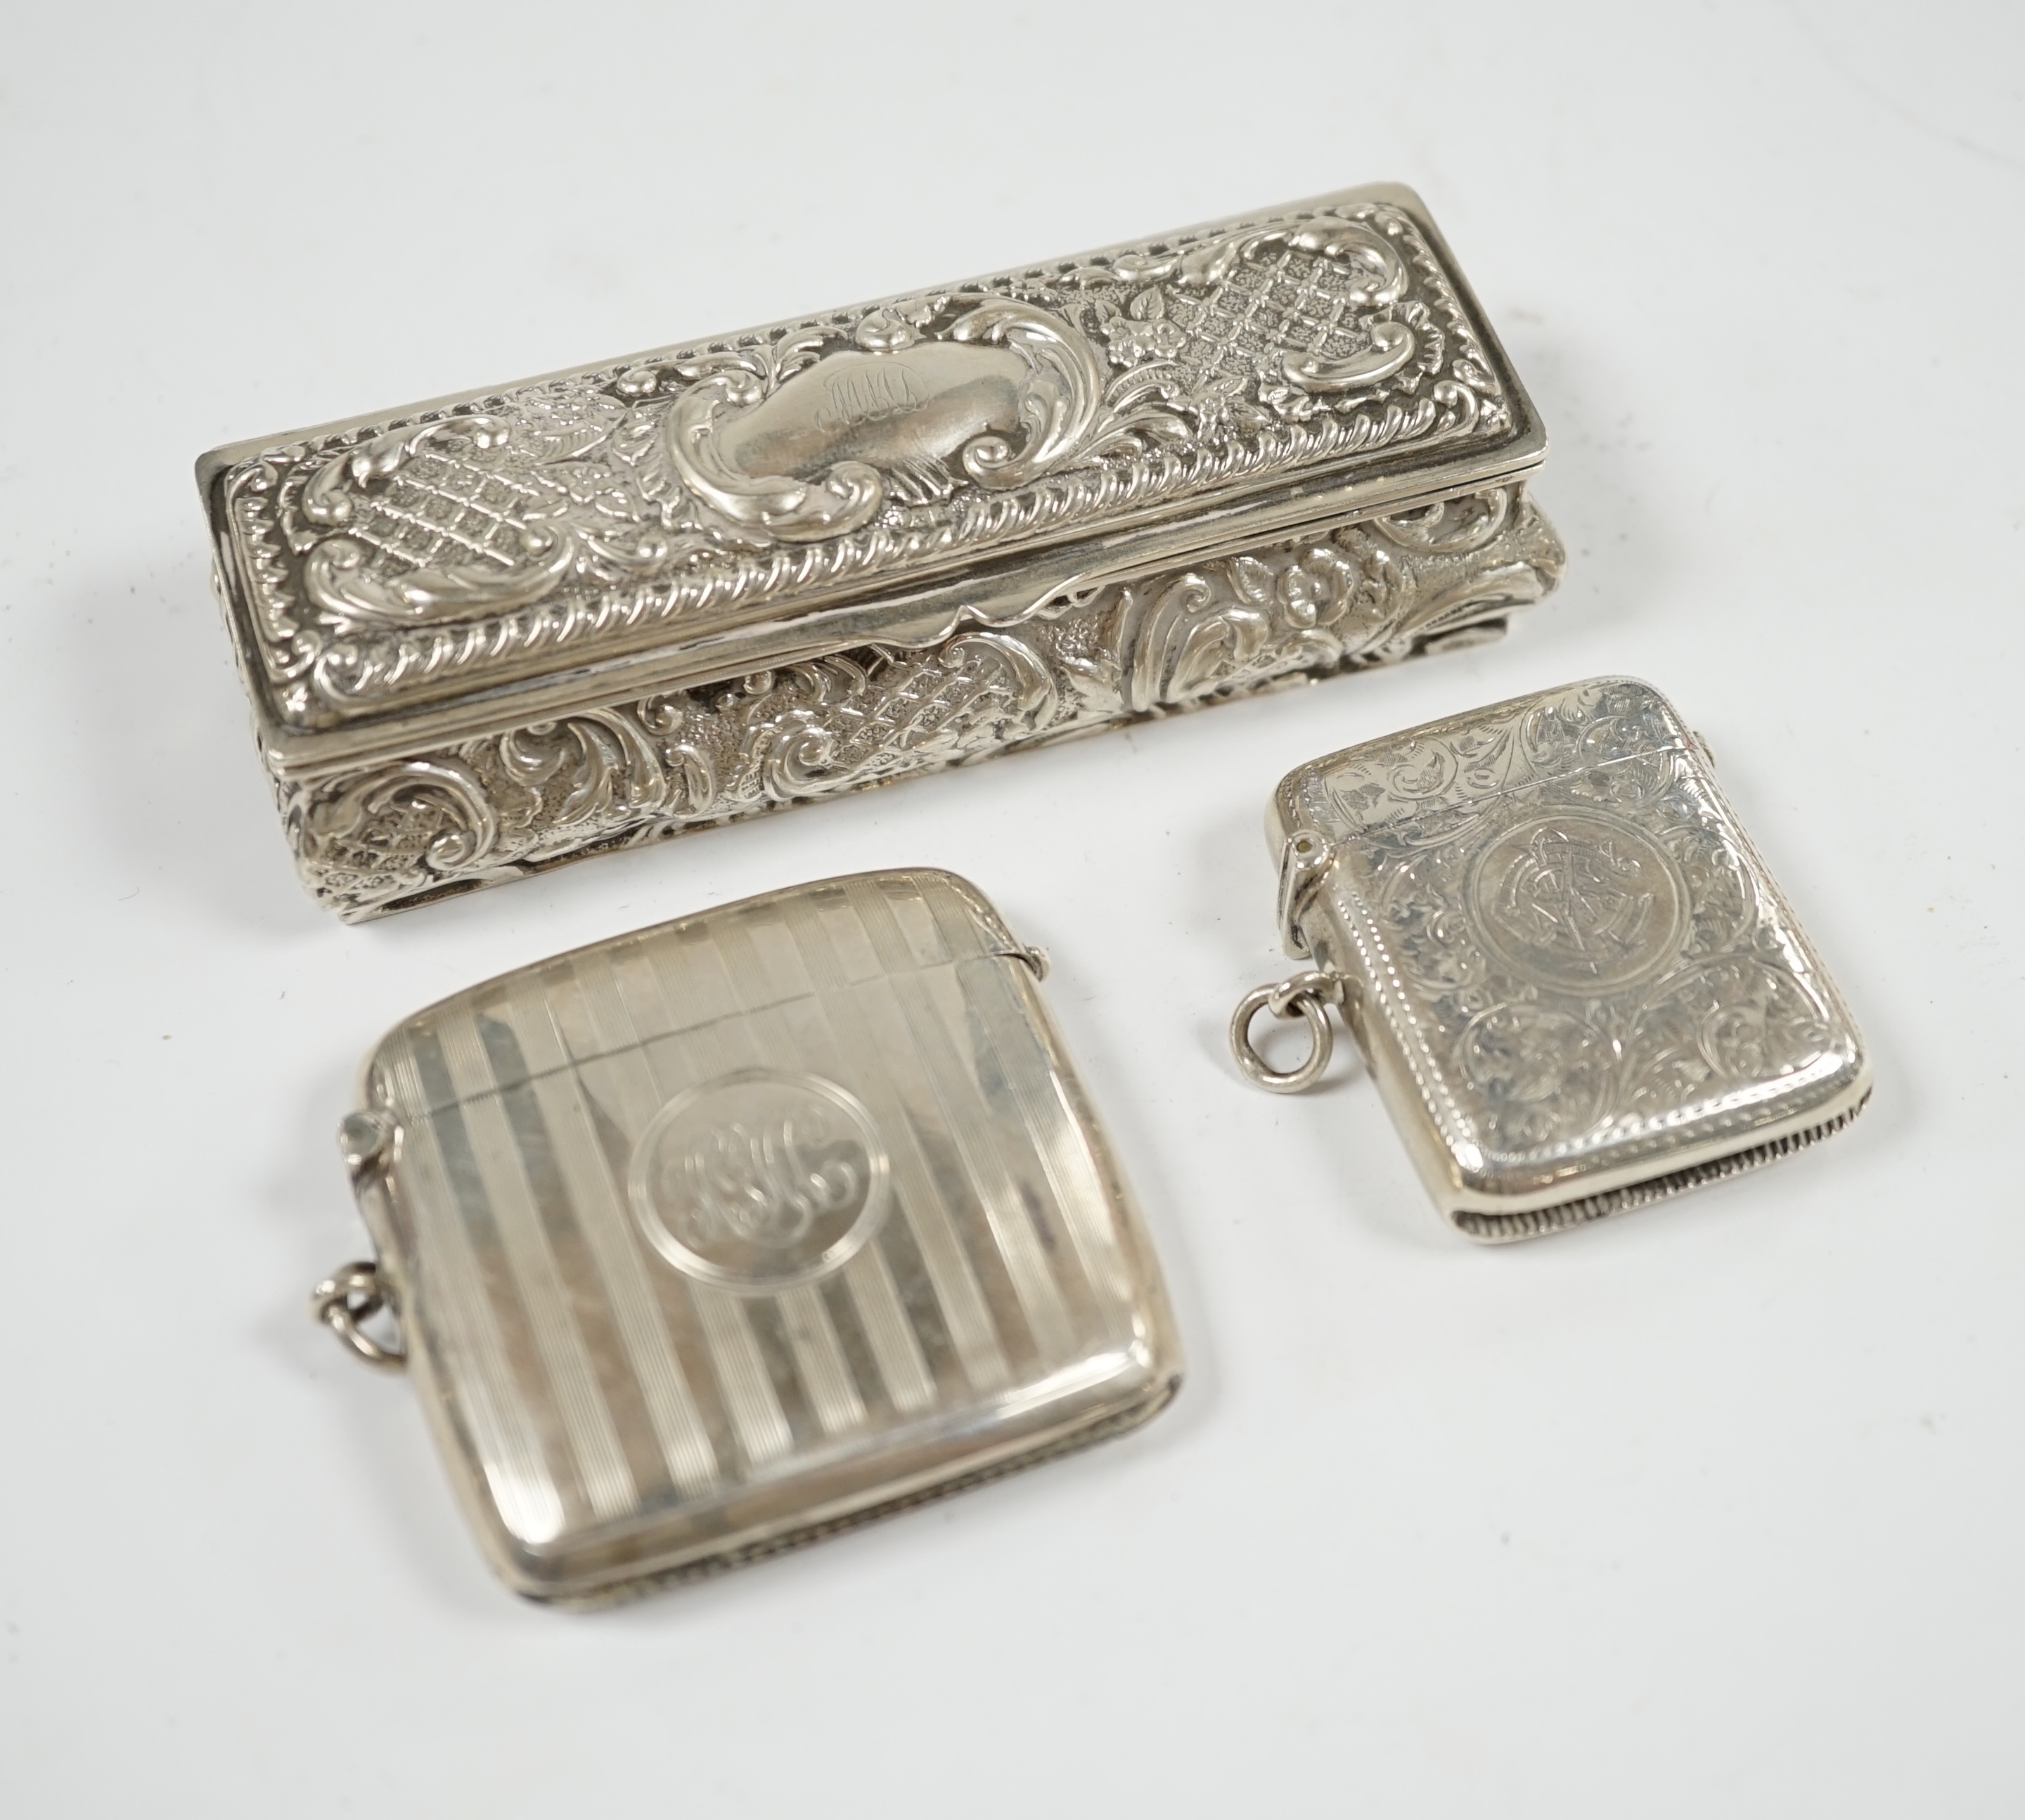 Two early 20th century silver vesta cases and an Edwardian repousse silver trinket box, 11cm. Condition - fair